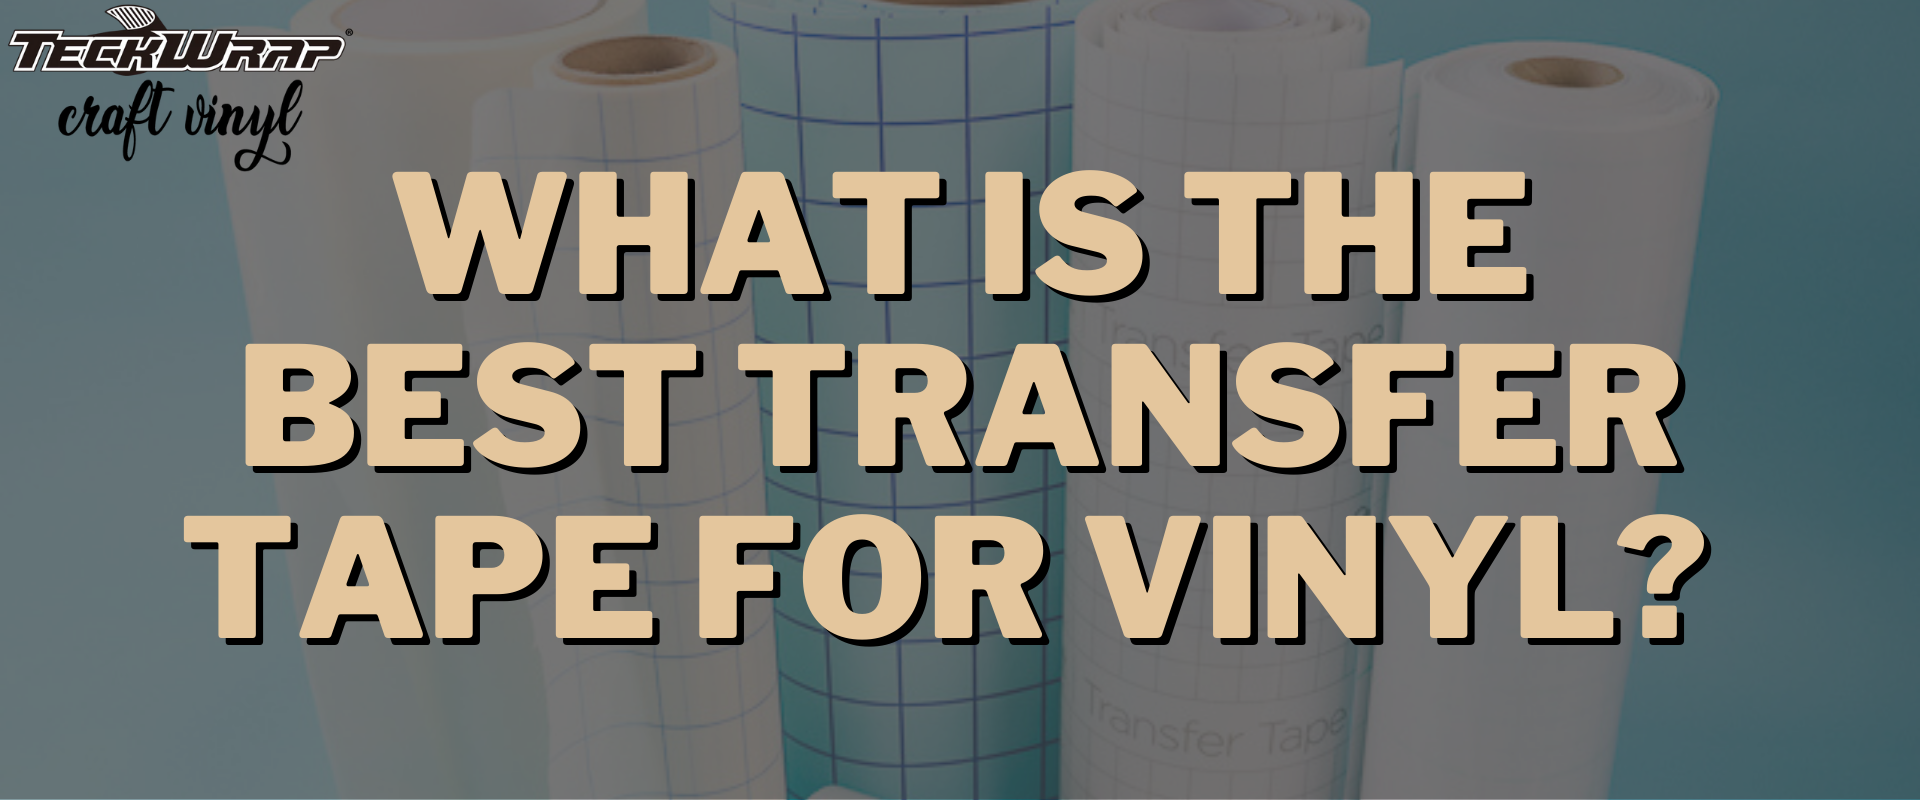 What kind of transfer tape do you use for HTV? : r/cricut